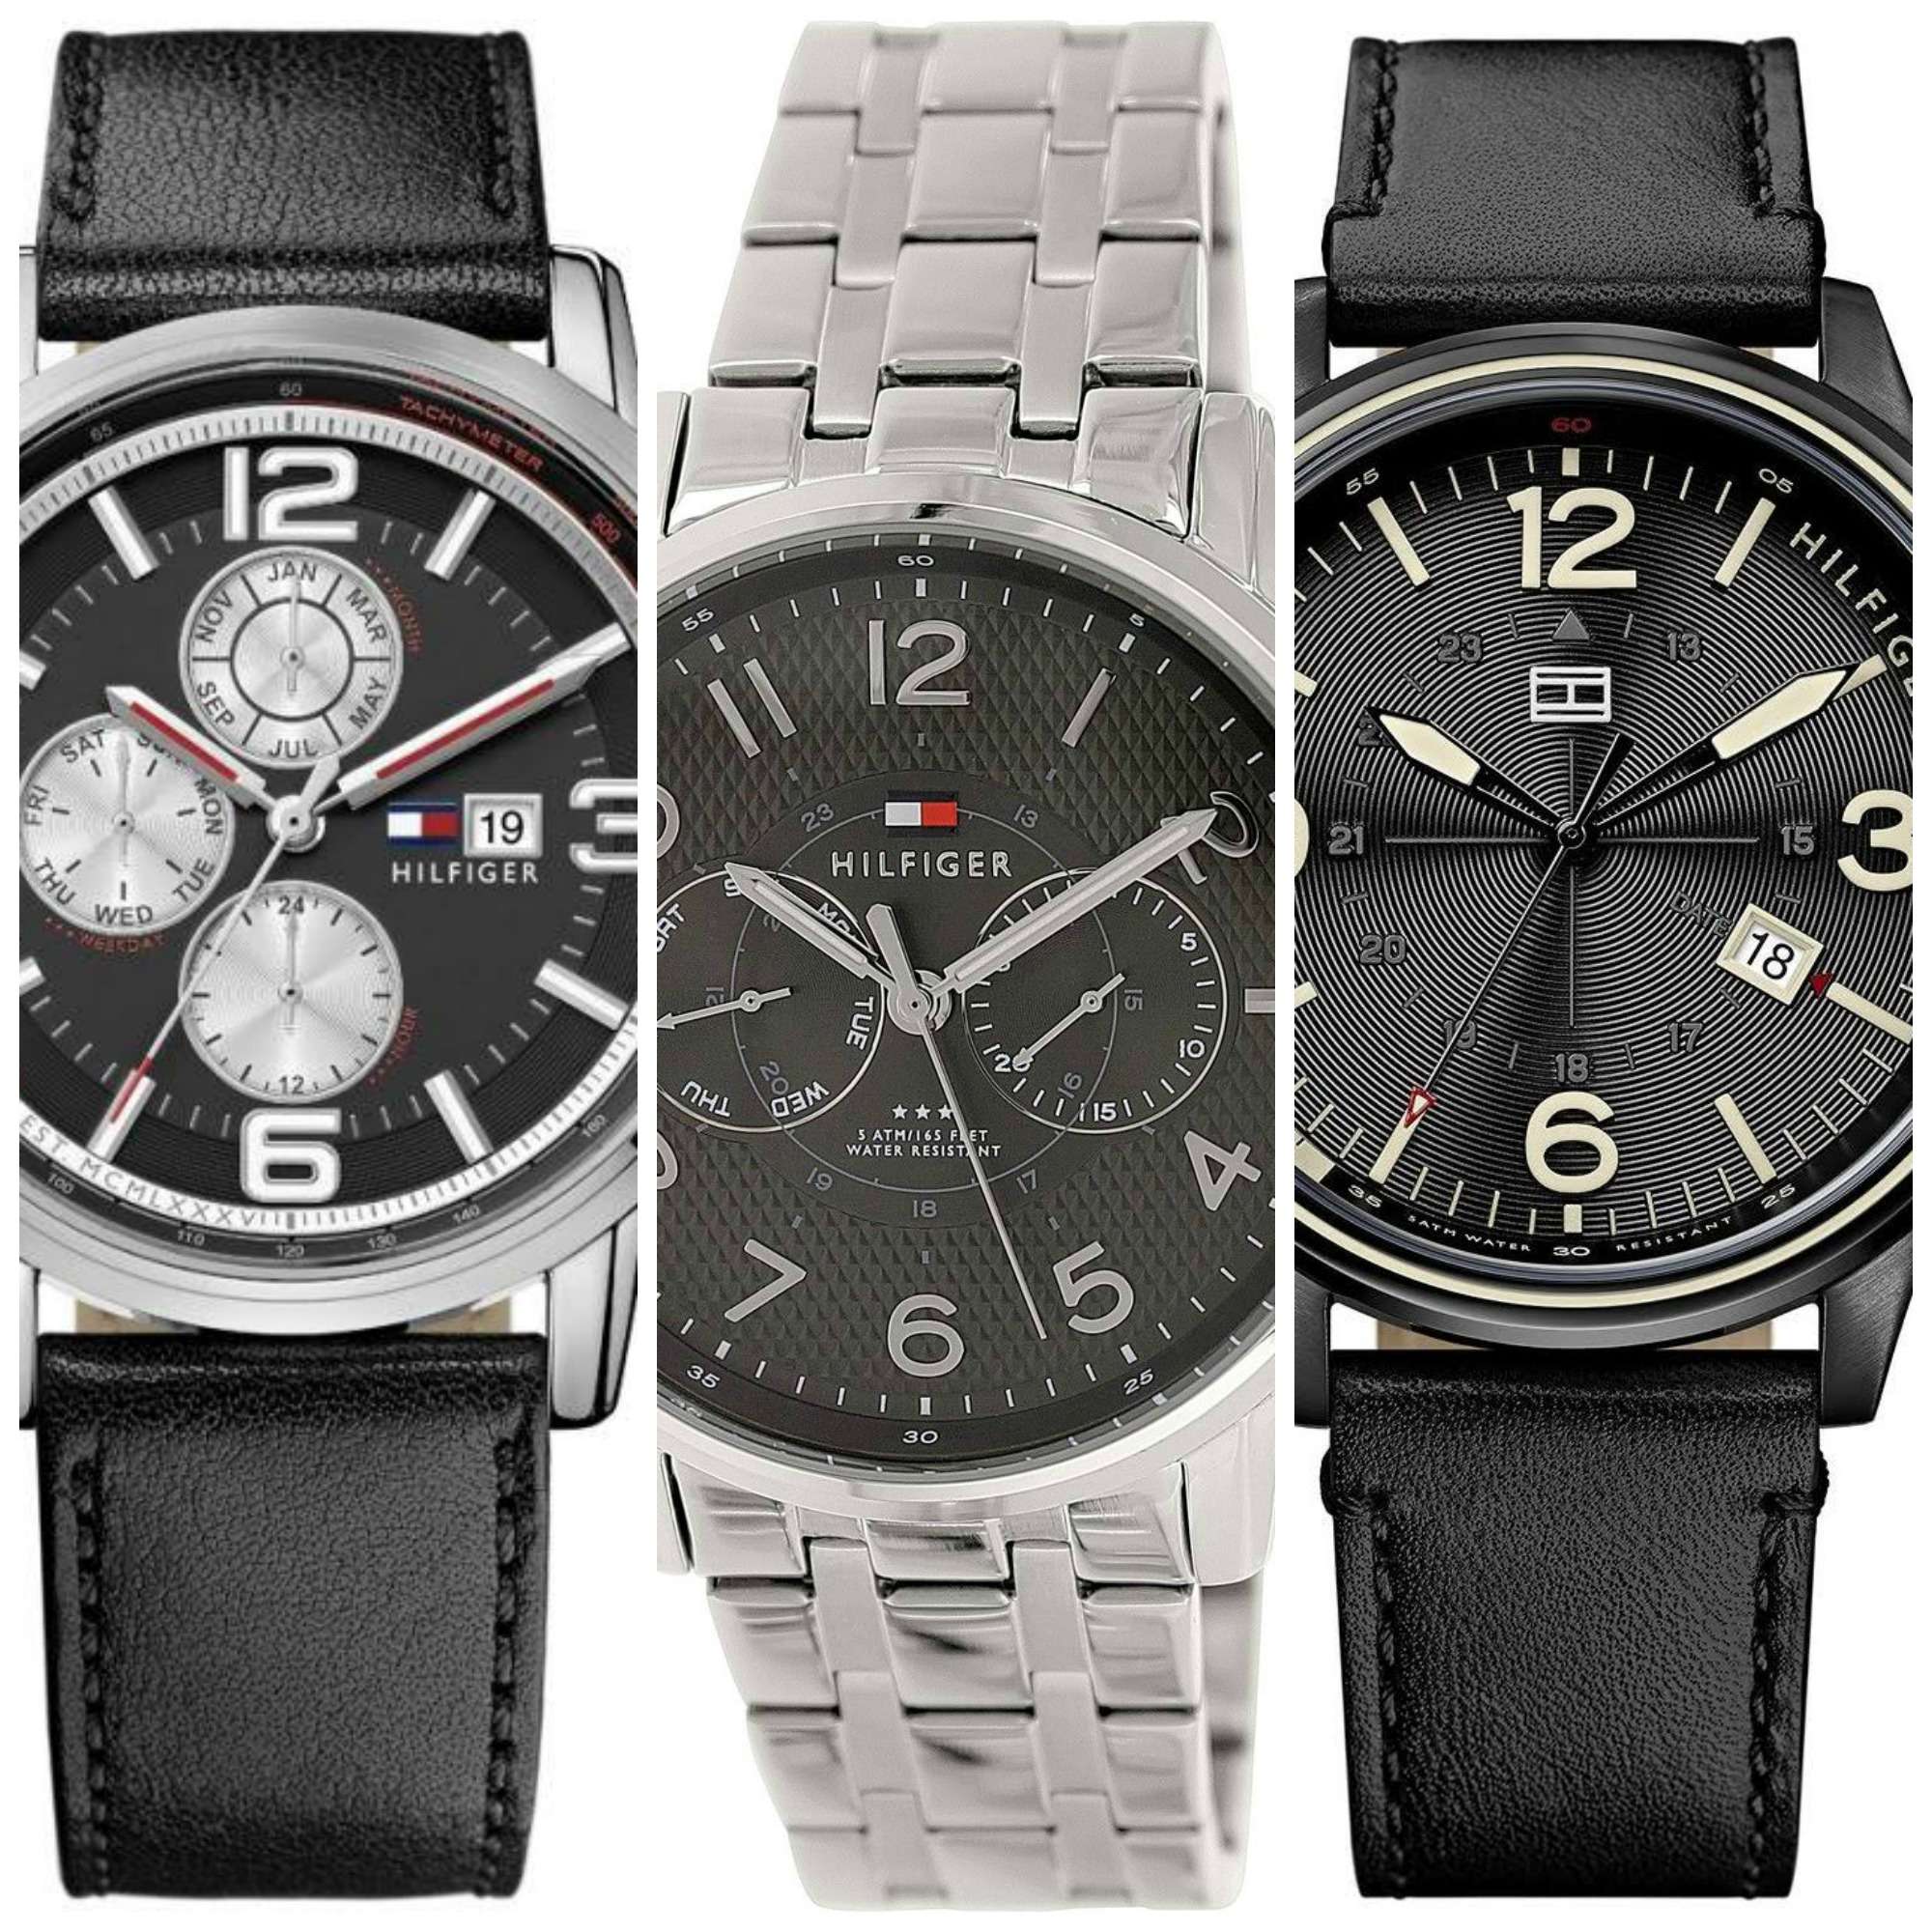 is tommy hilfiger watch a good brand